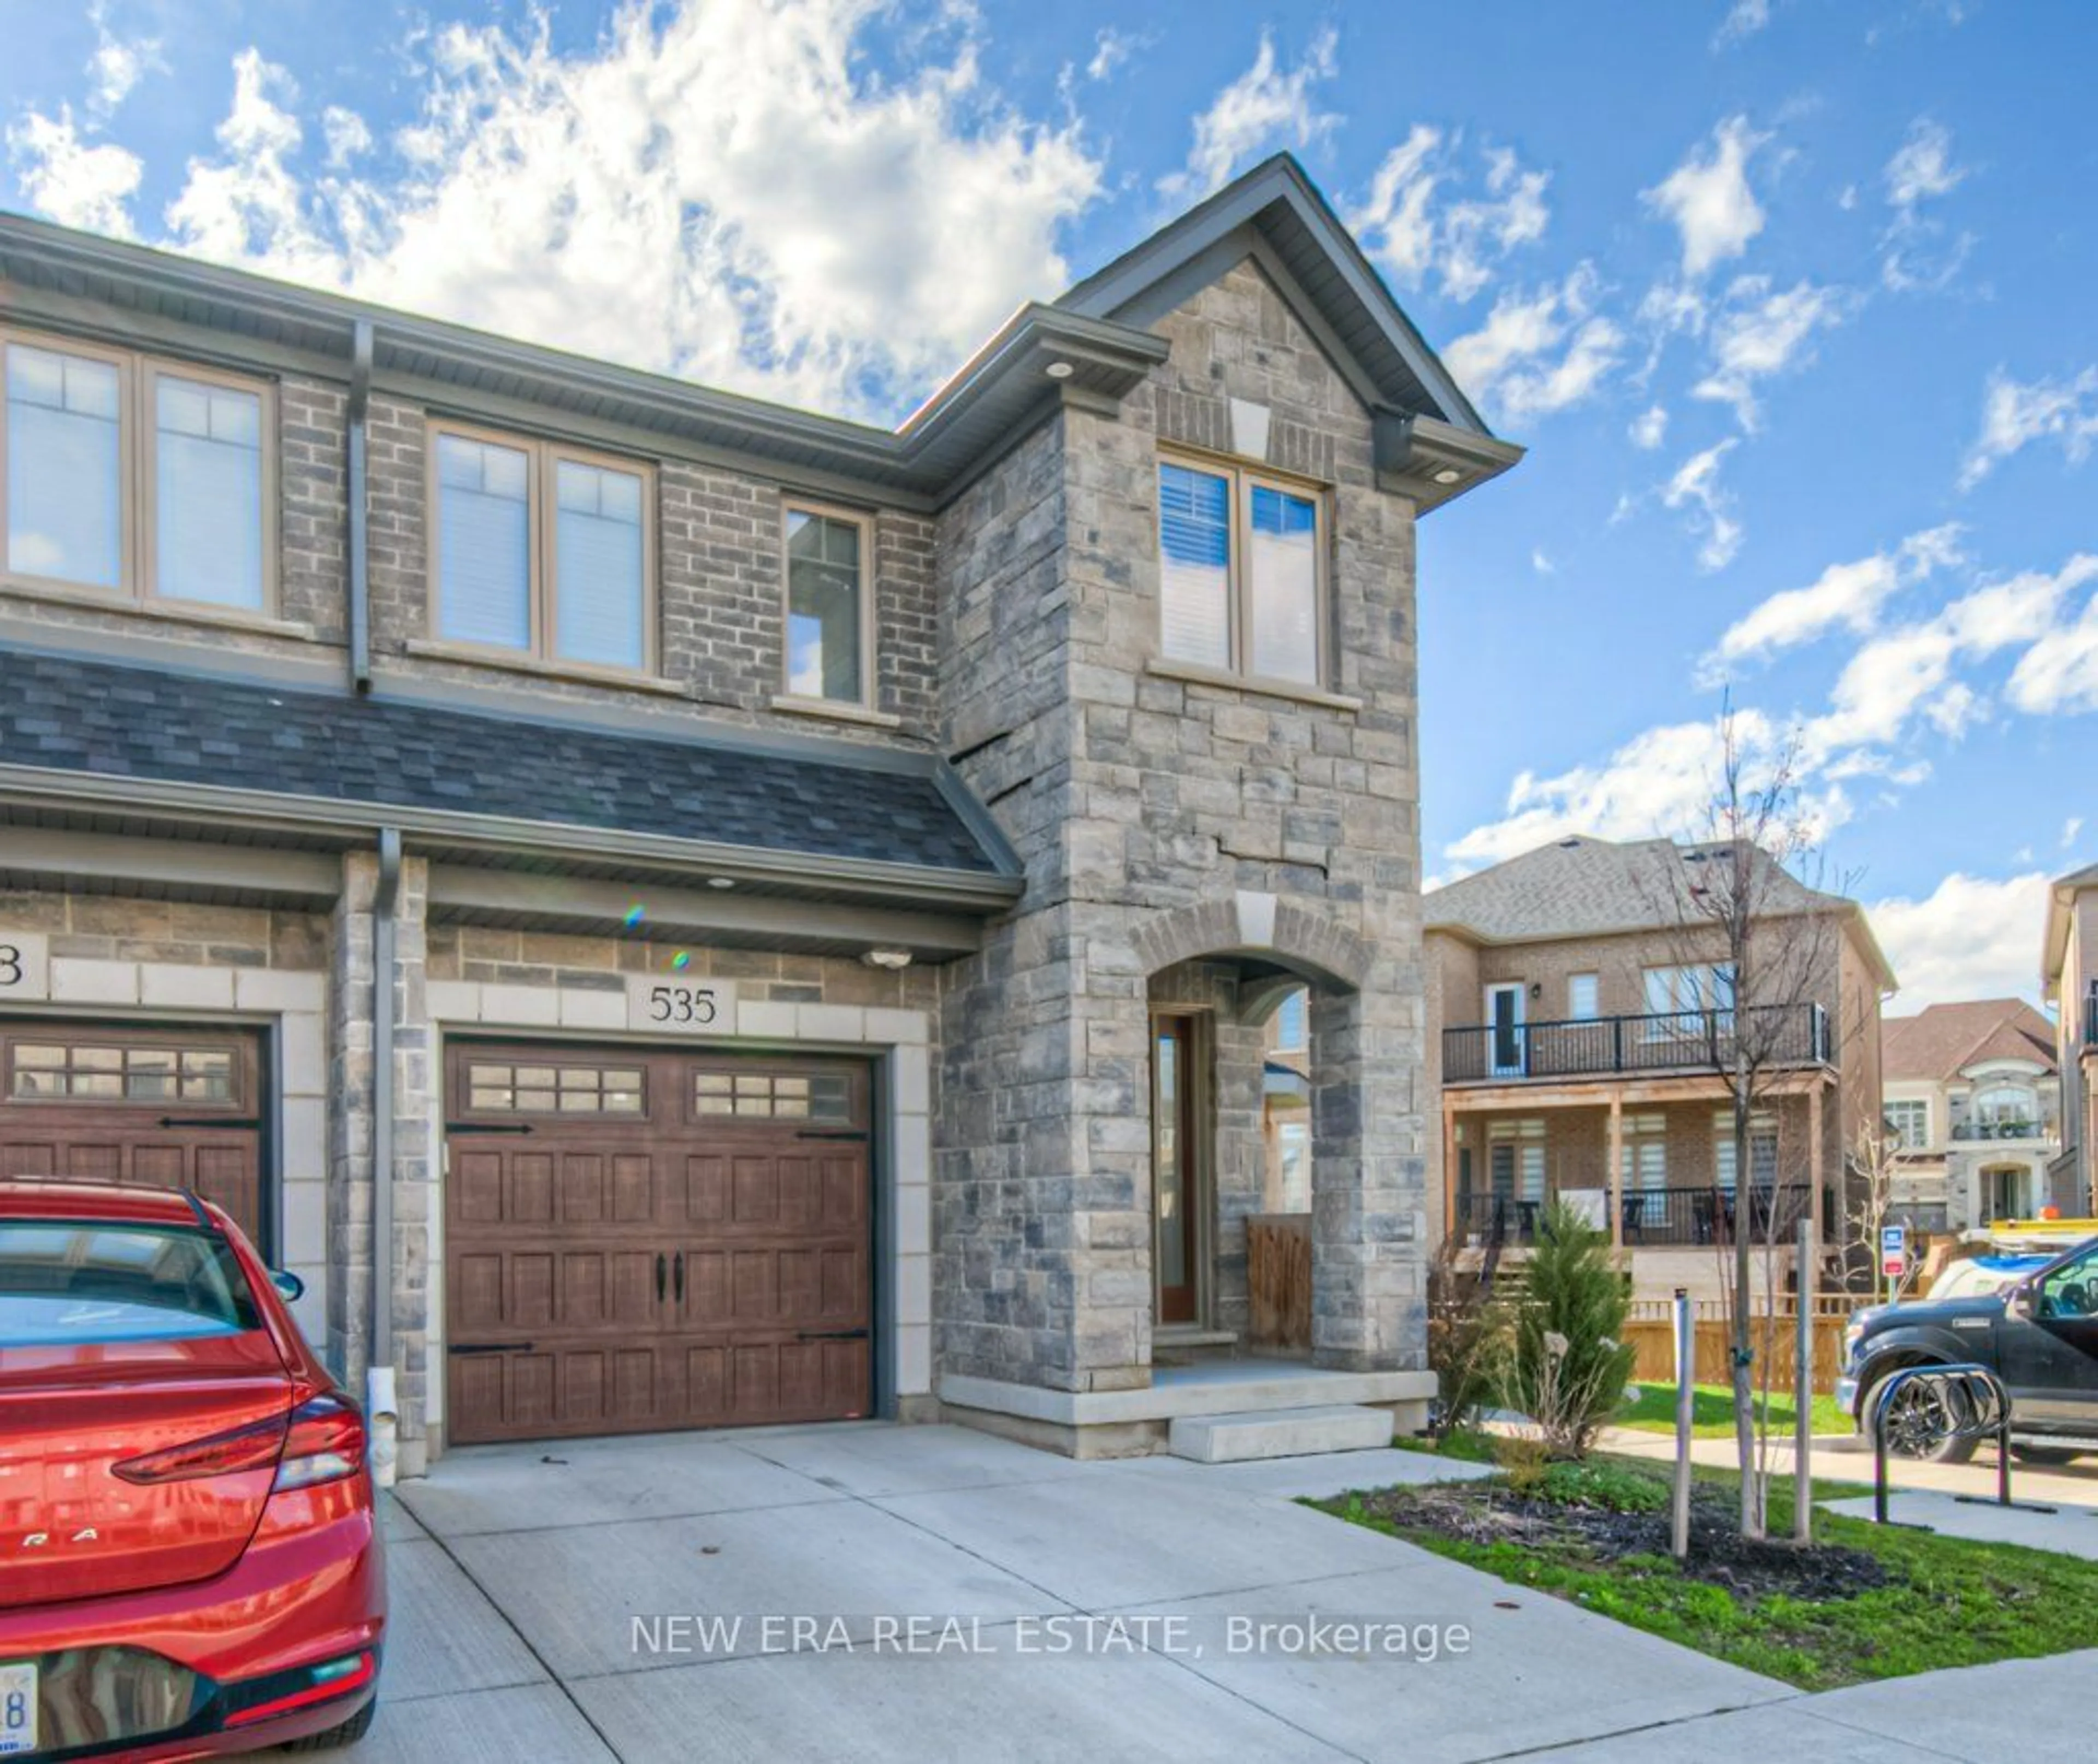 Home with brick exterior material for 535 Hollybrook Cres, Kitchener Ontario N2R 0P1